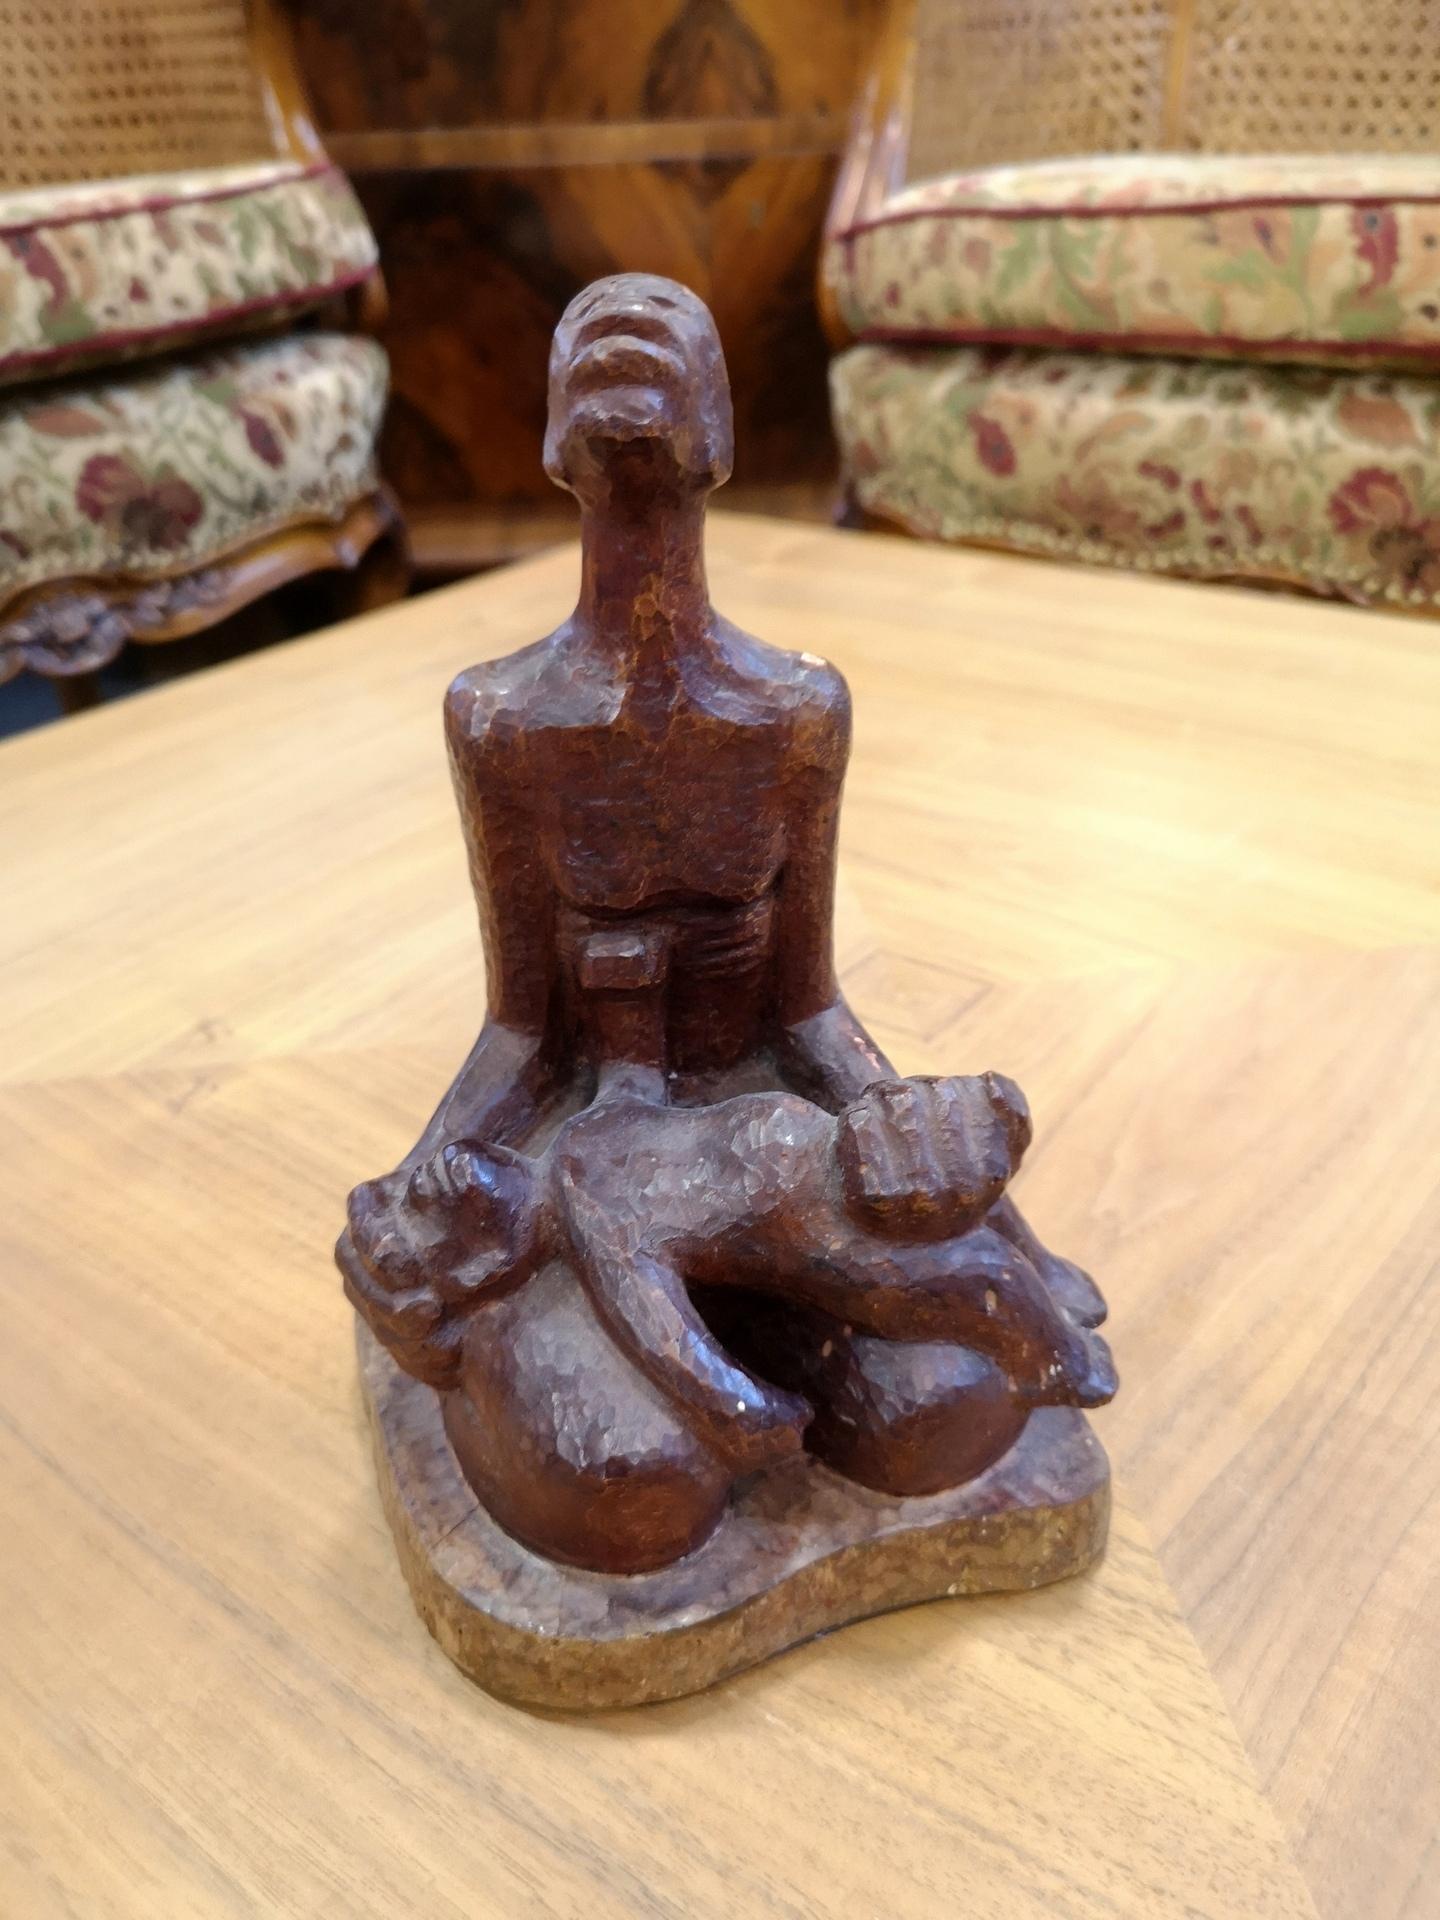 From hand carved fruitwood, this sculpture depicts a dramatic scene of a parent holding a child. The sculpture is signed on the back 